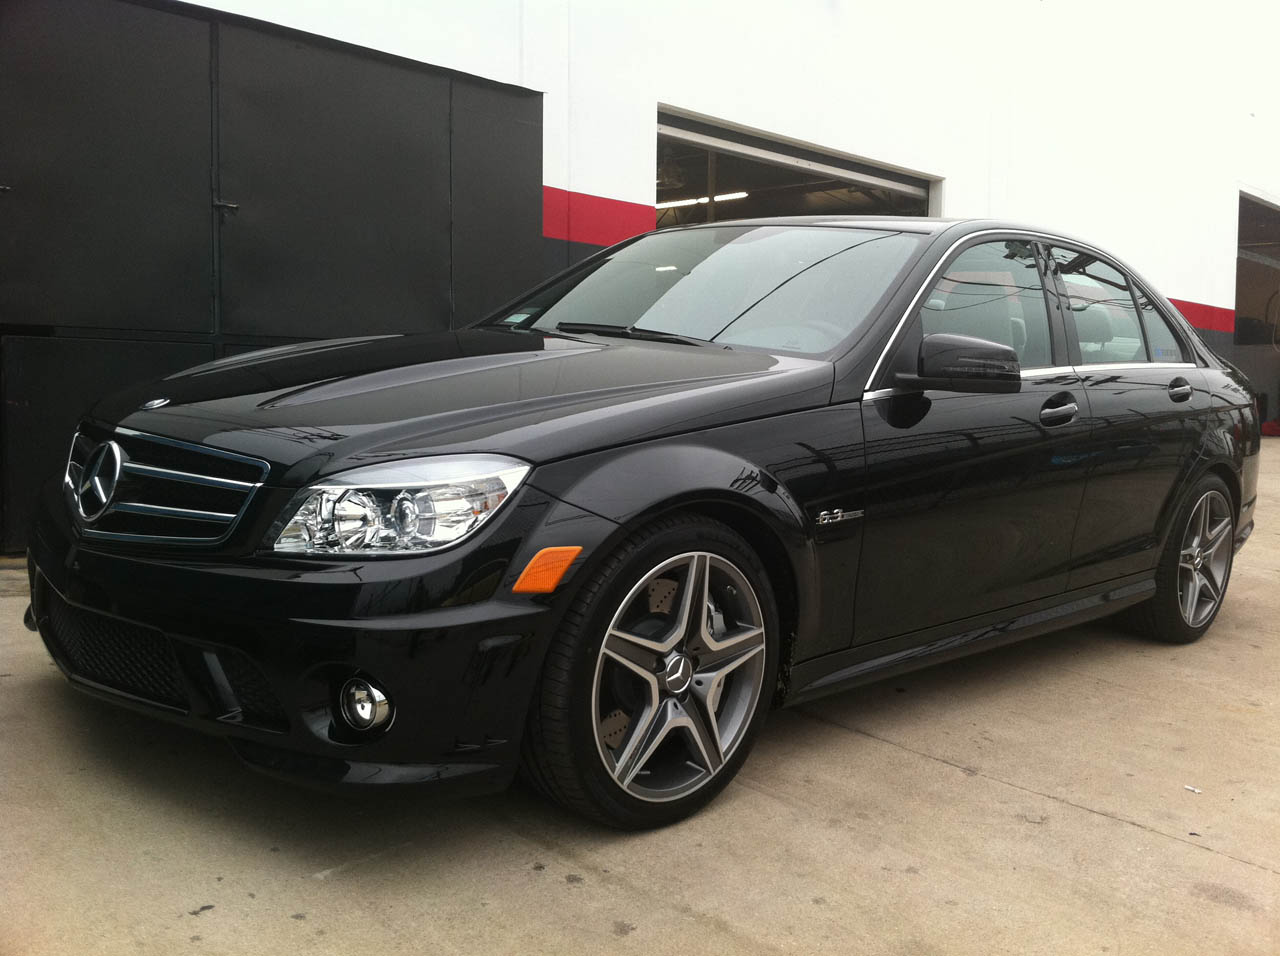 2011  Mercedes-Benz C63 AMG OE Tuning, Gintani Stg1 Exhaust, Street Tire picture, mods, upgrades